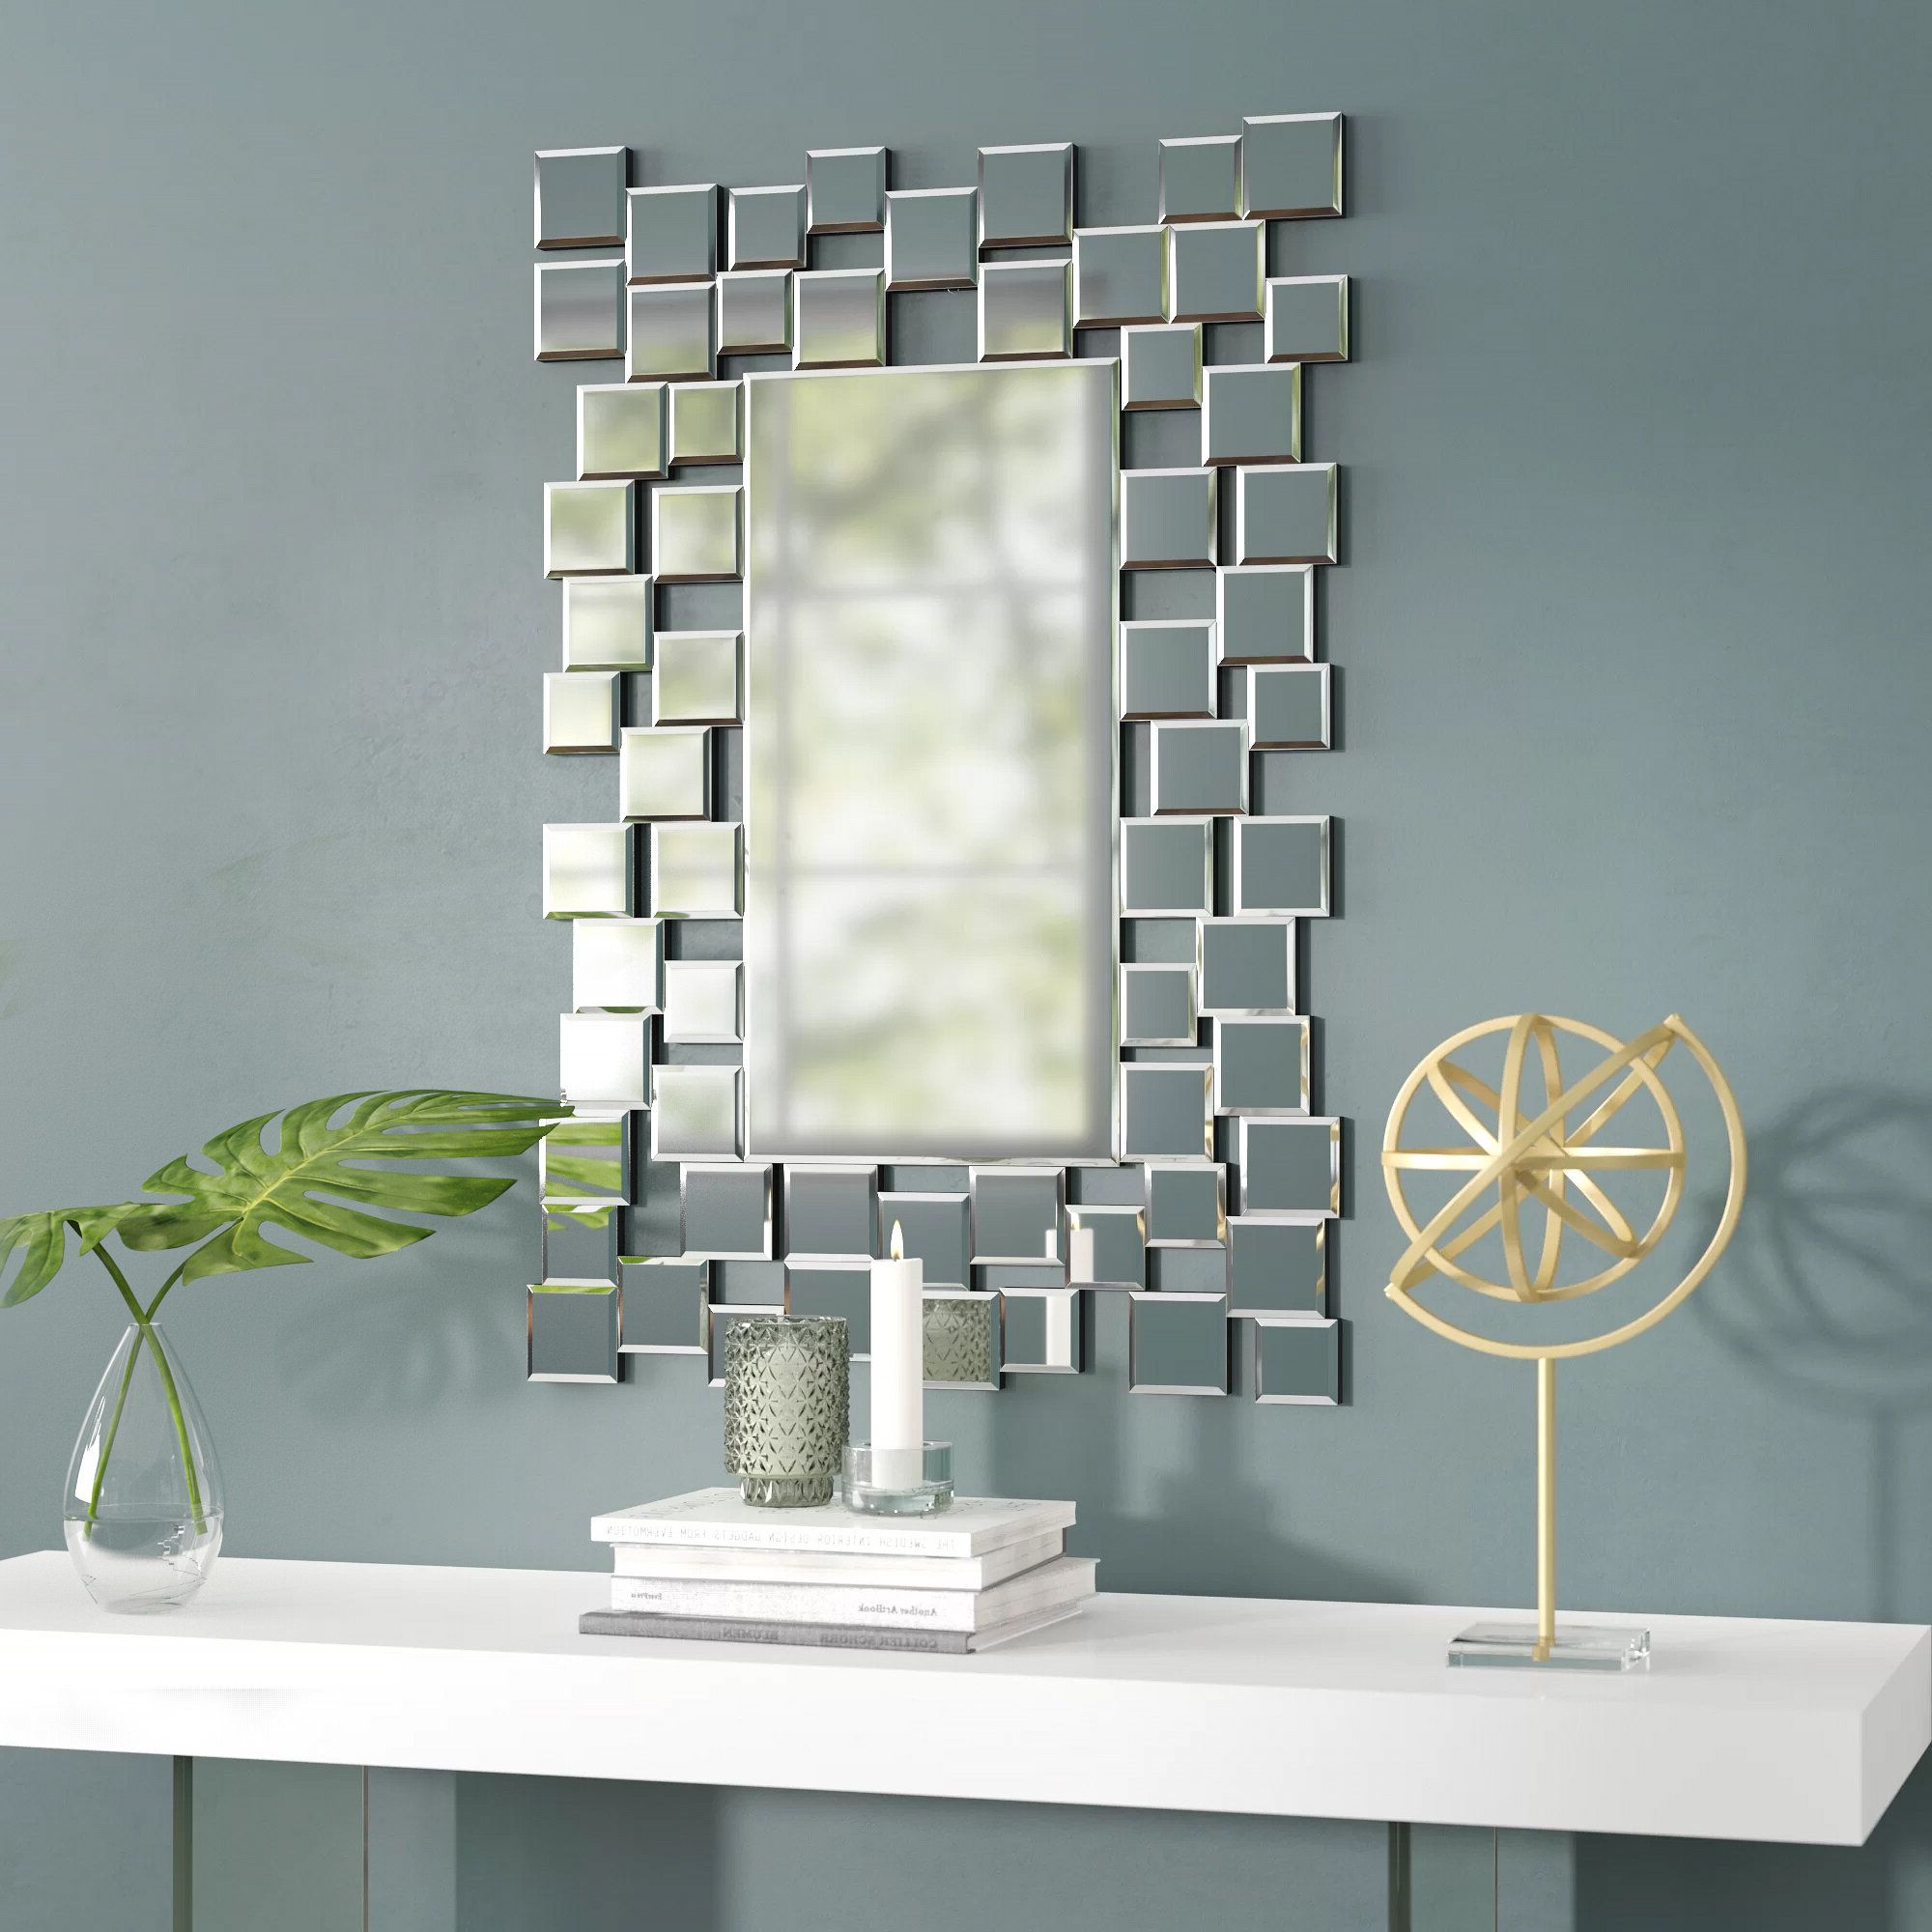 Accent Mirrors: Reflections Of Style And Sophistication